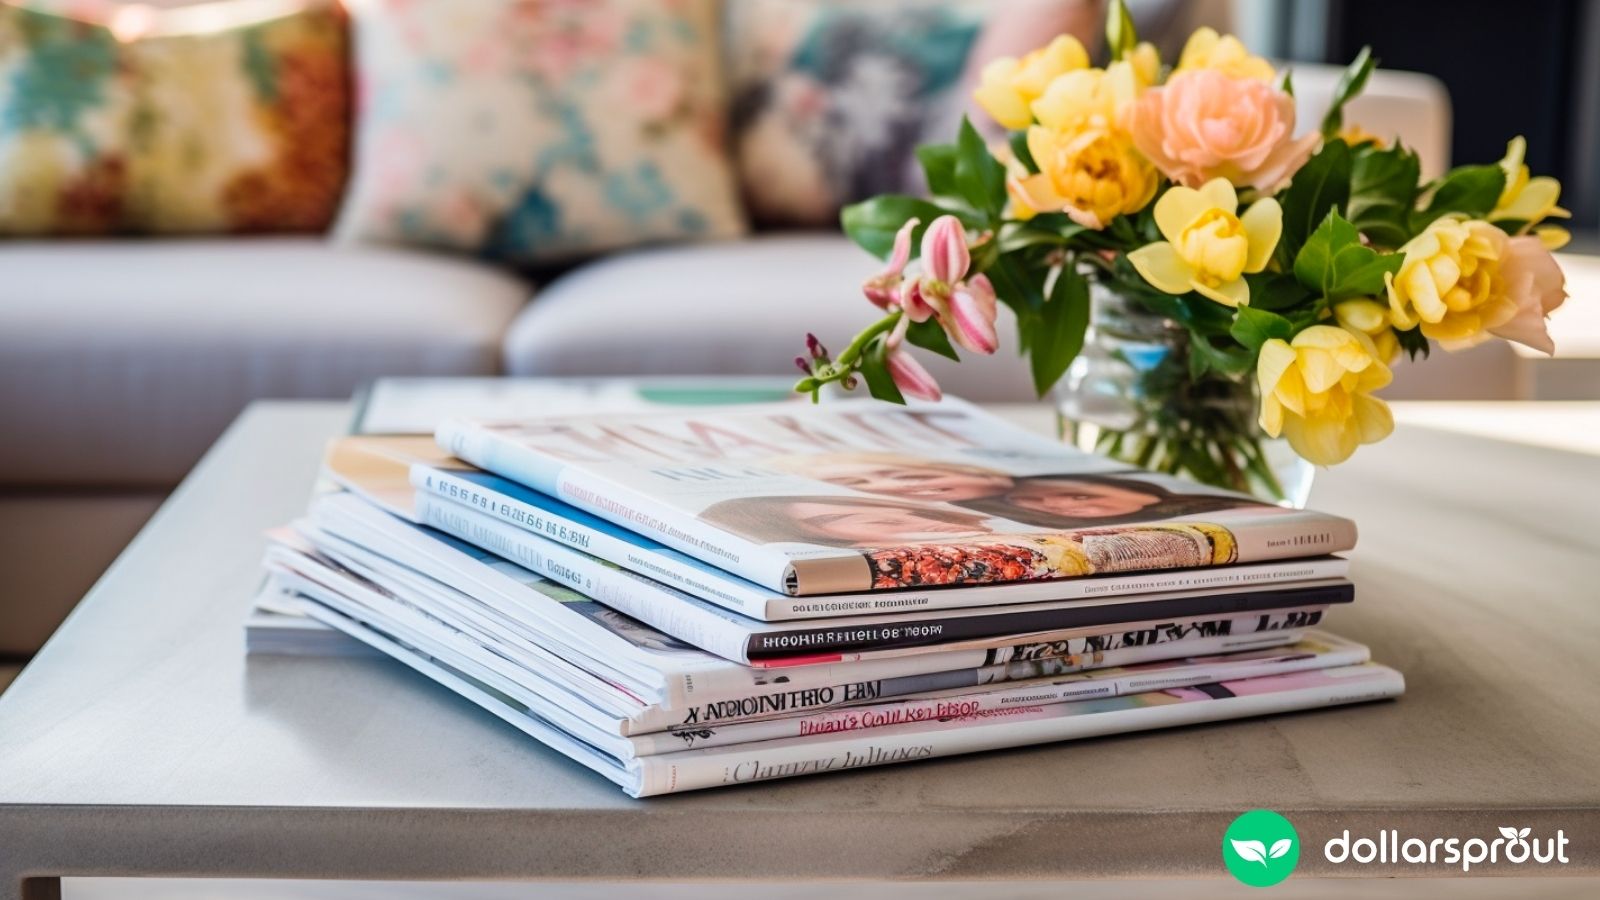 How That Stack of Old Magazines Can Boost Your Career